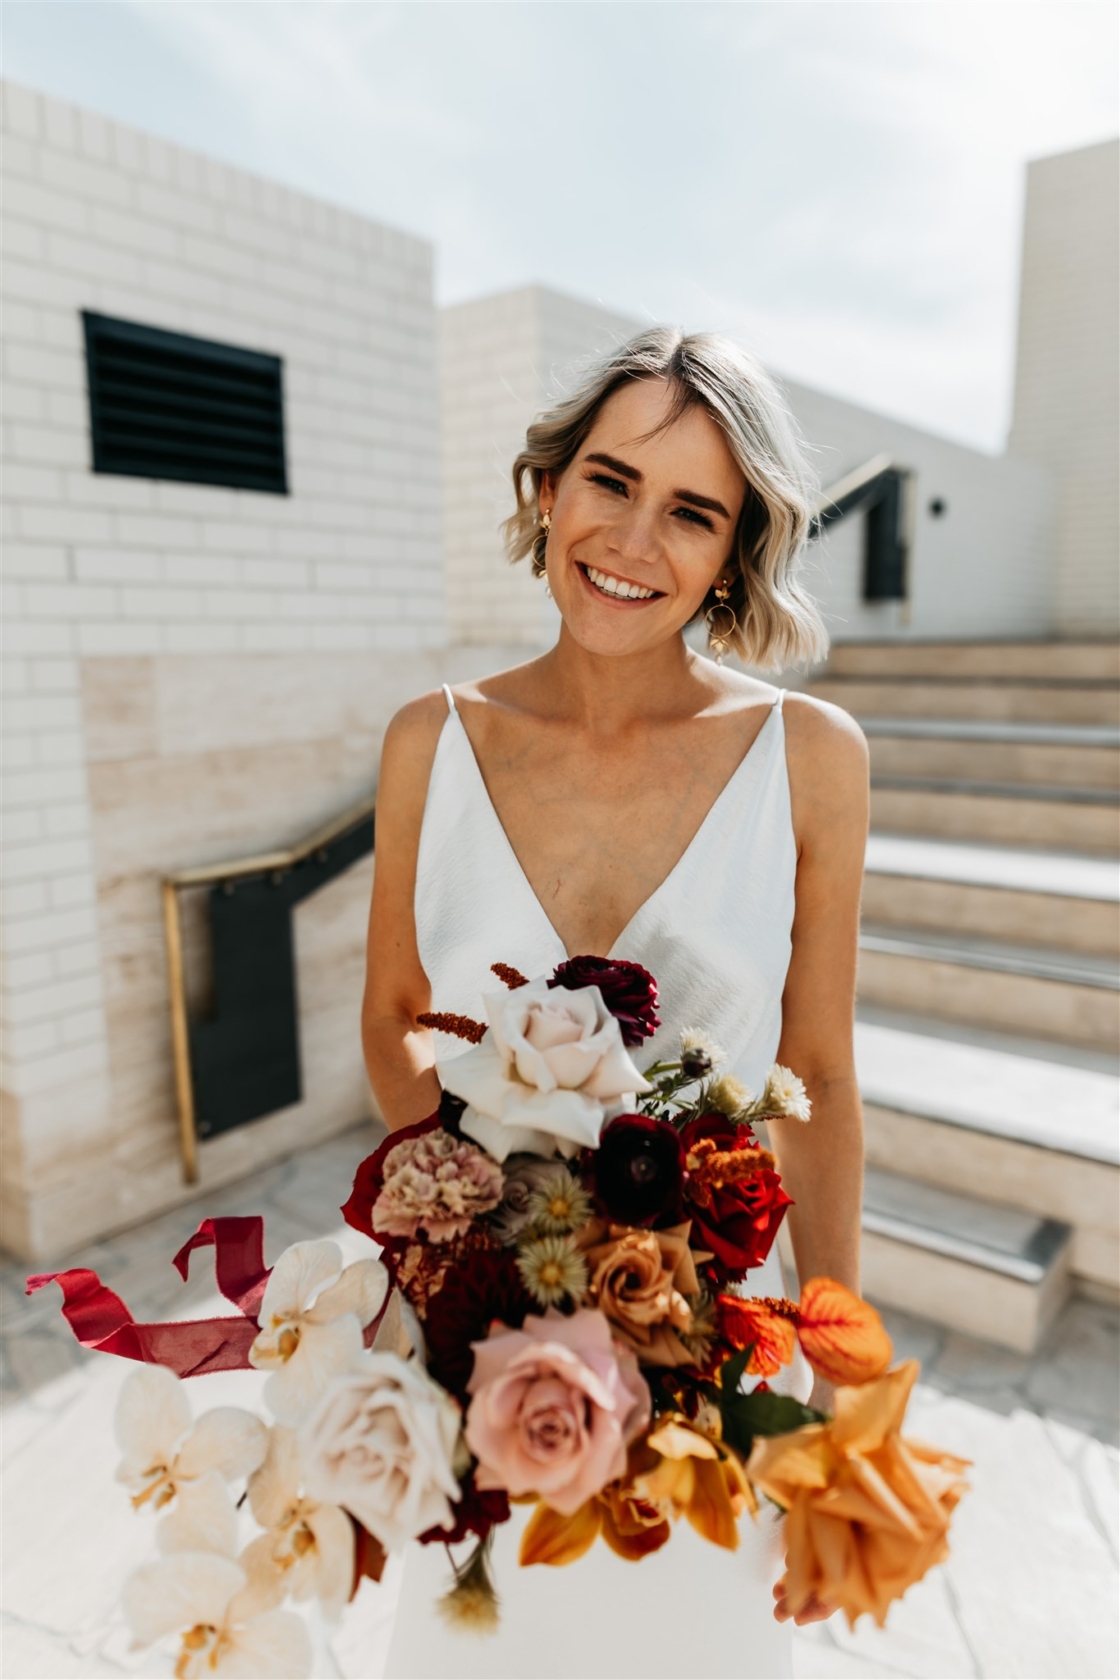 A women holding up a bouquet of coloured flowers and roses in her wedding dresss